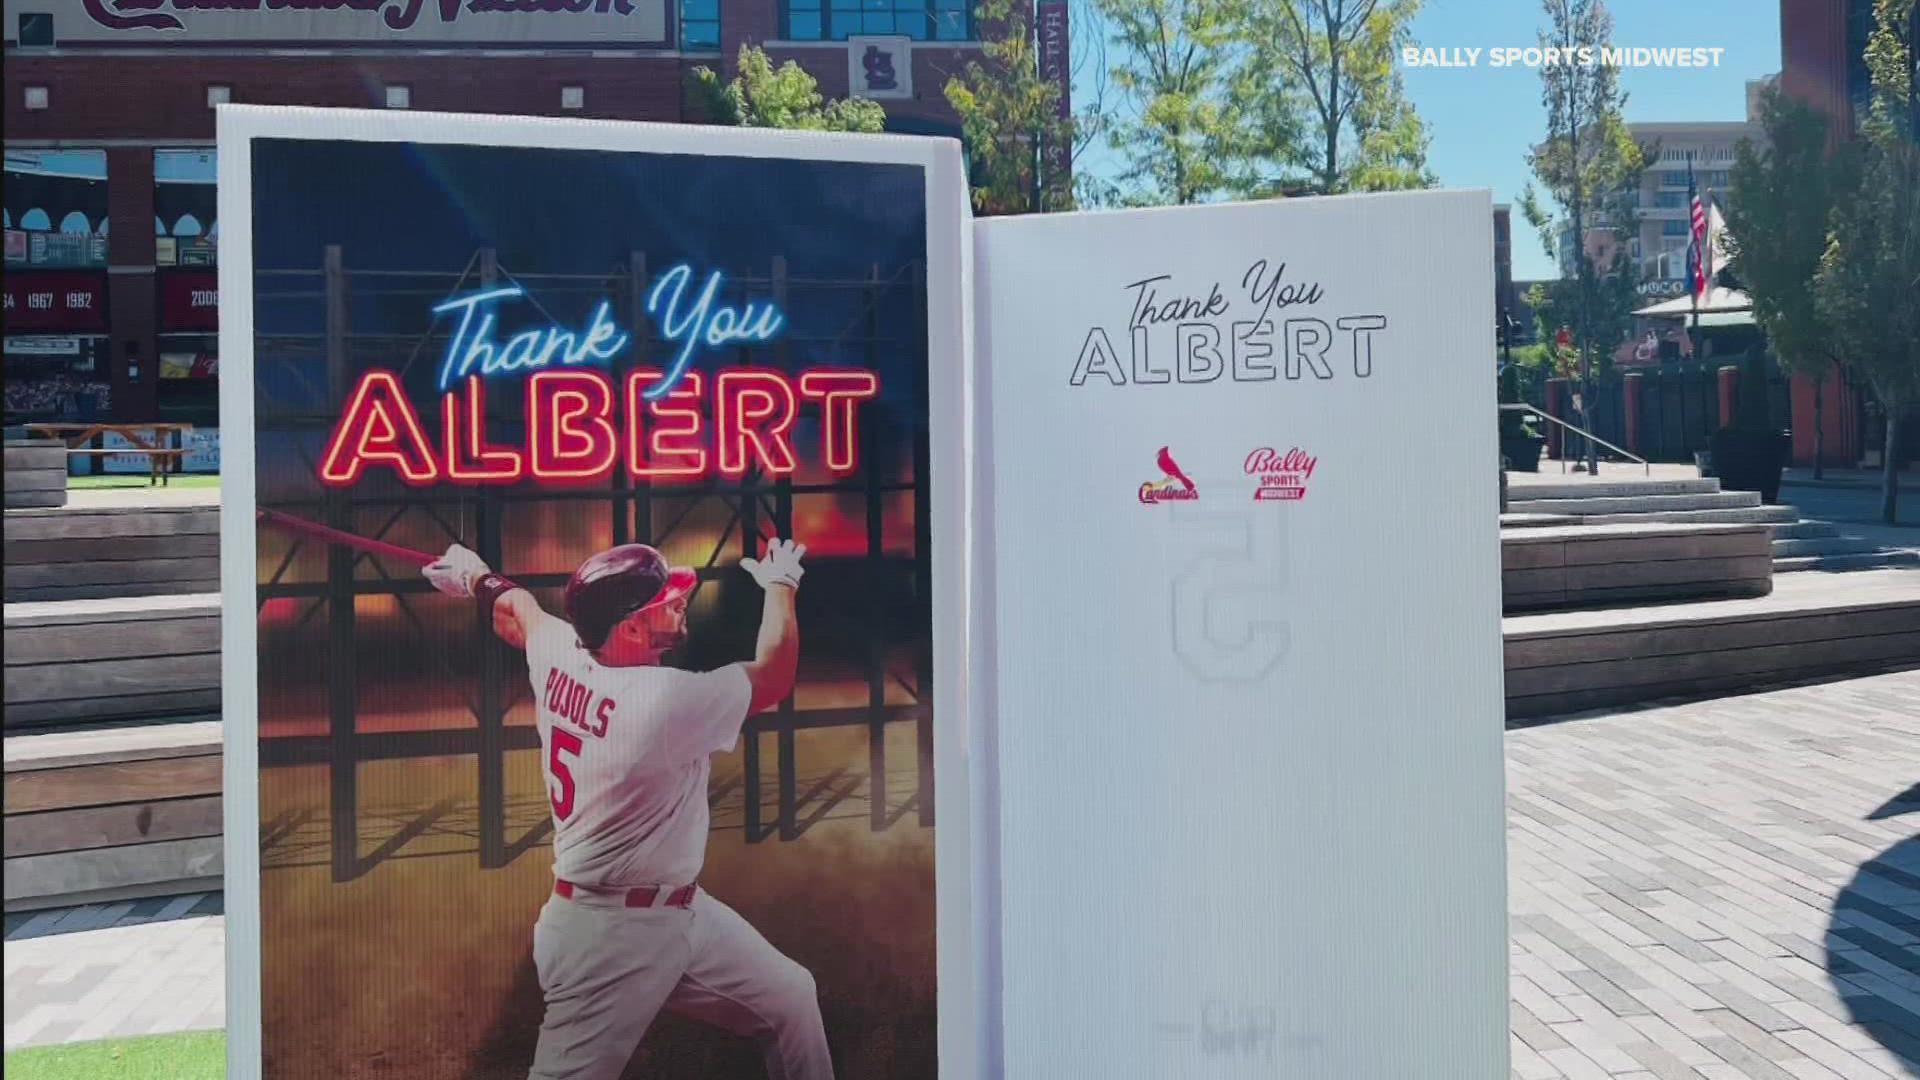 During the final homestand of the regular season, fans are invited to sign giant thank you cards for Yadier Molina and Albert Pujols.